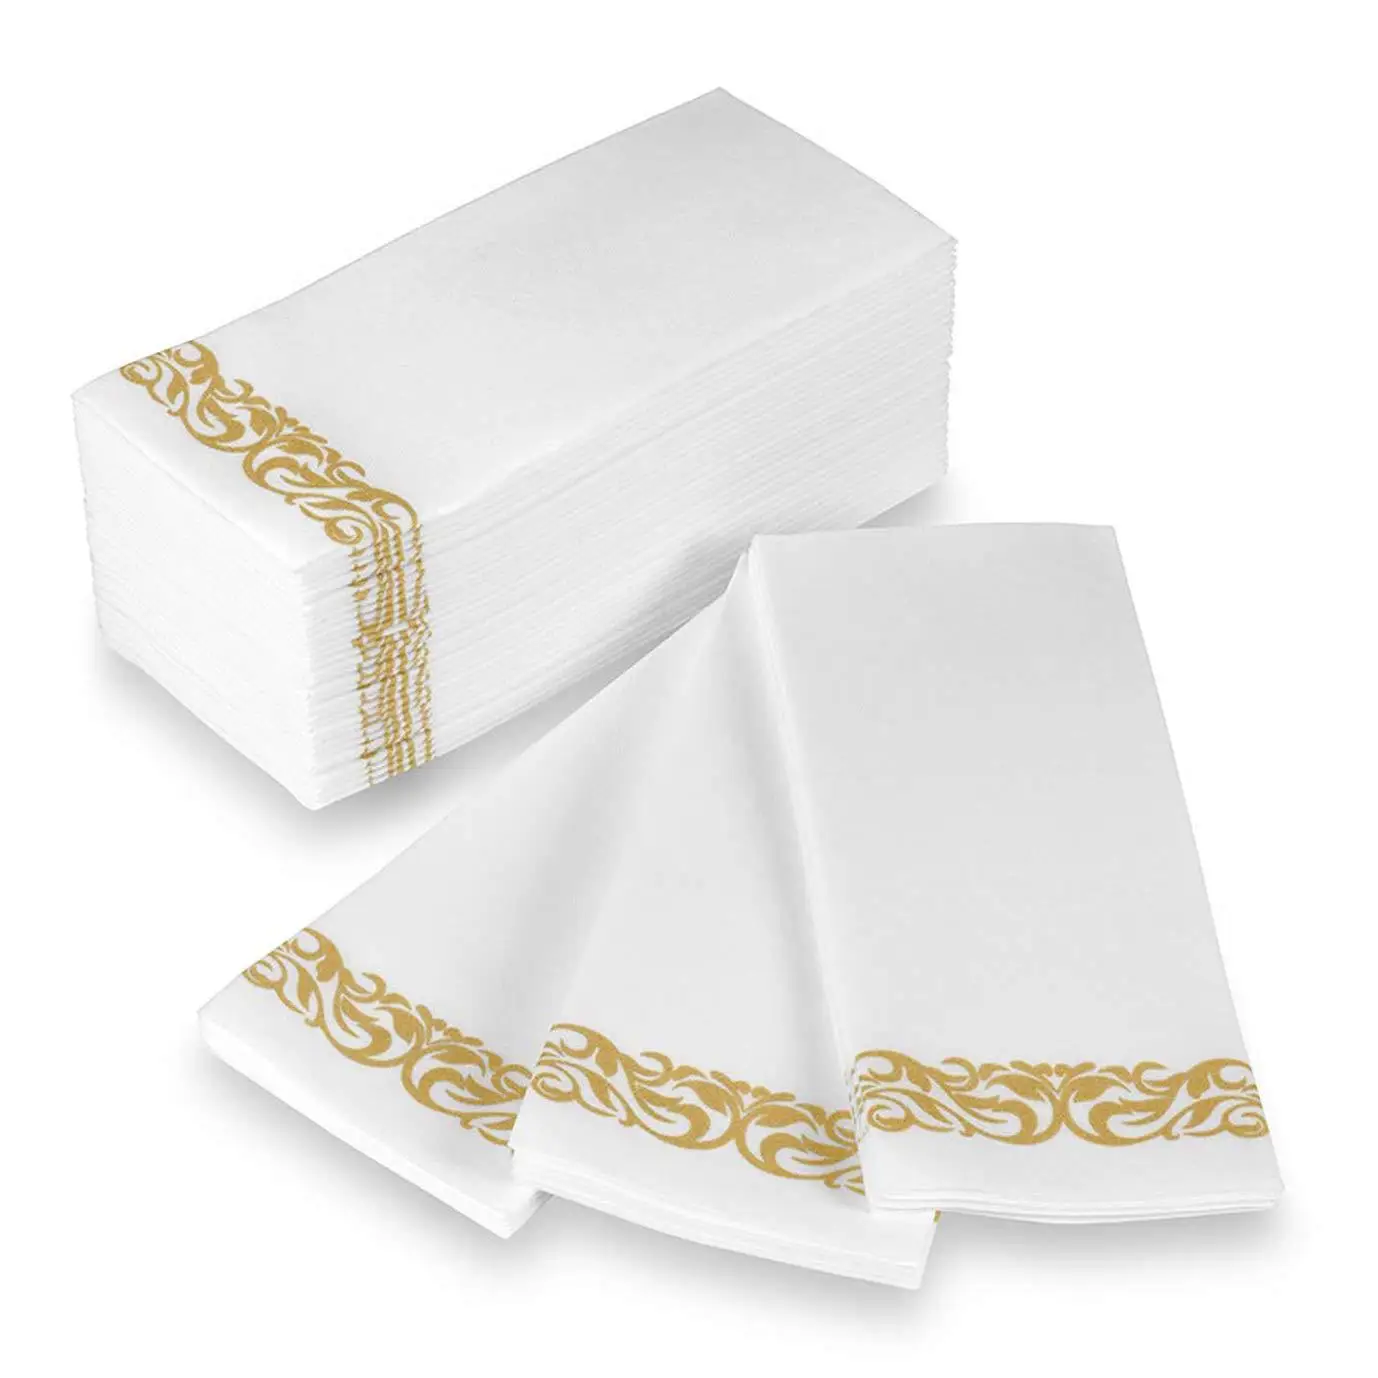 Disposable Hand Towels Soft and Absorbent Linen-Feel Paper Guest Towels 